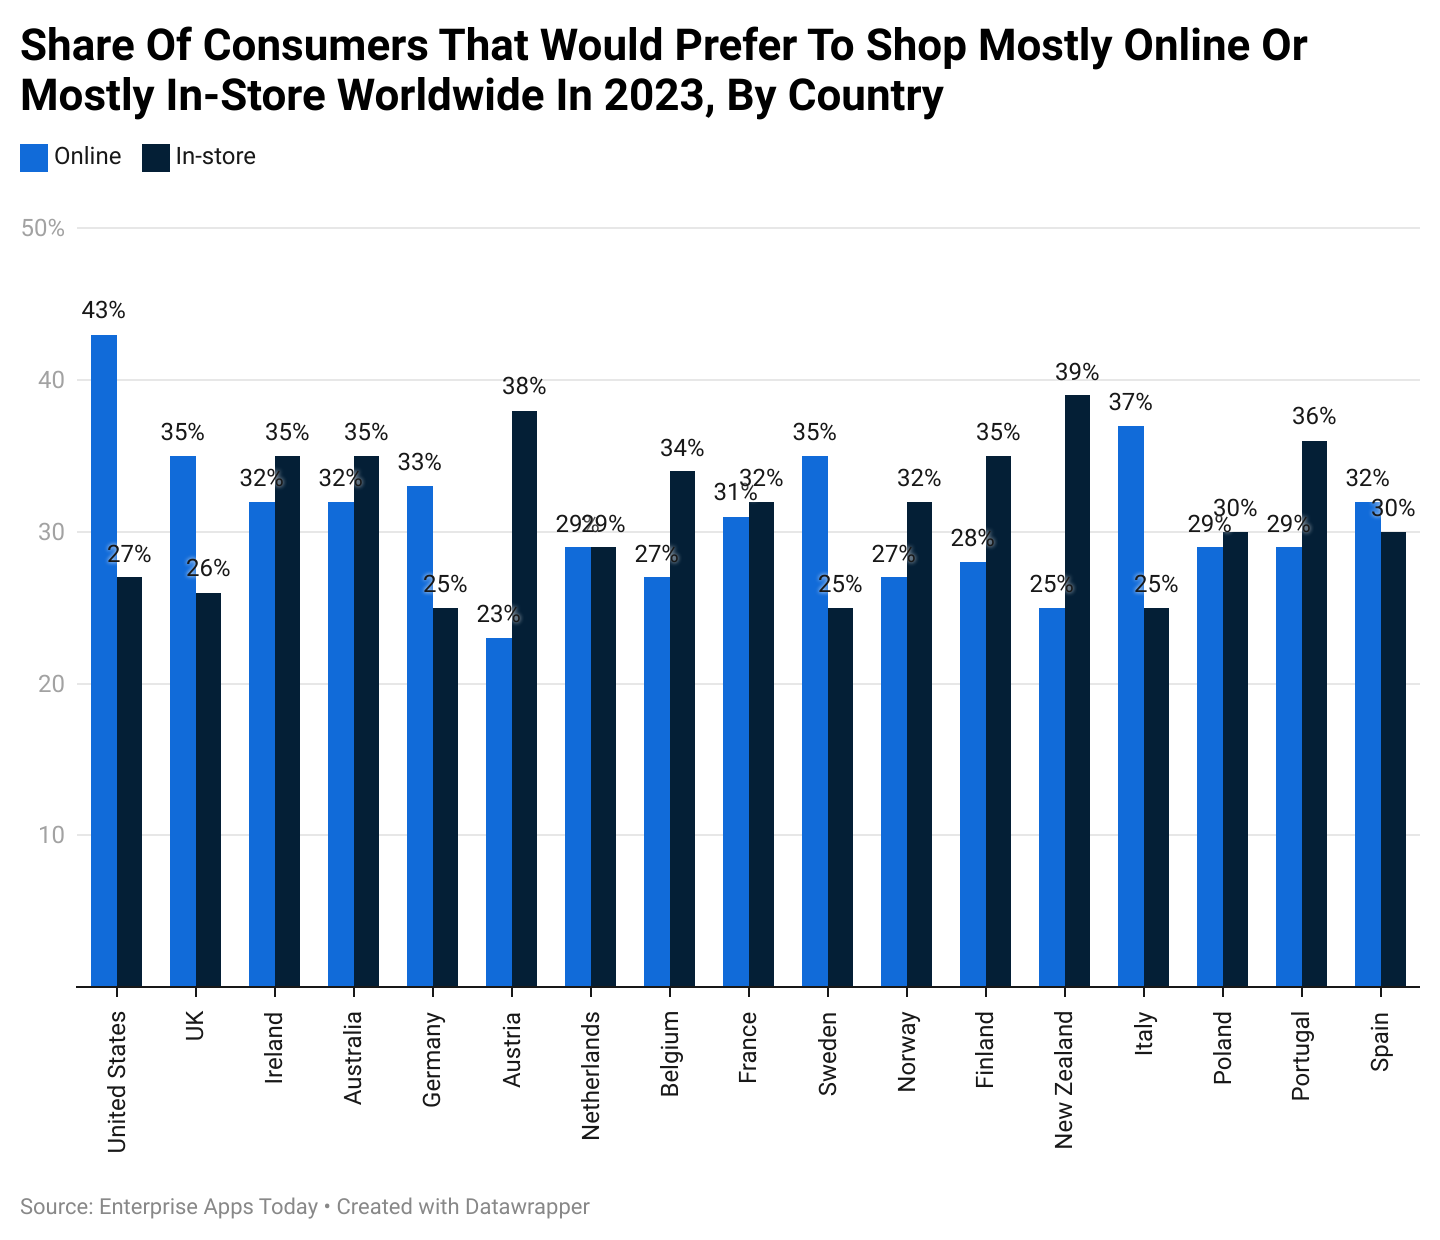 Share of consumers that would prefer to shop mostly online or mostly in-store worldwide in 2023, by country